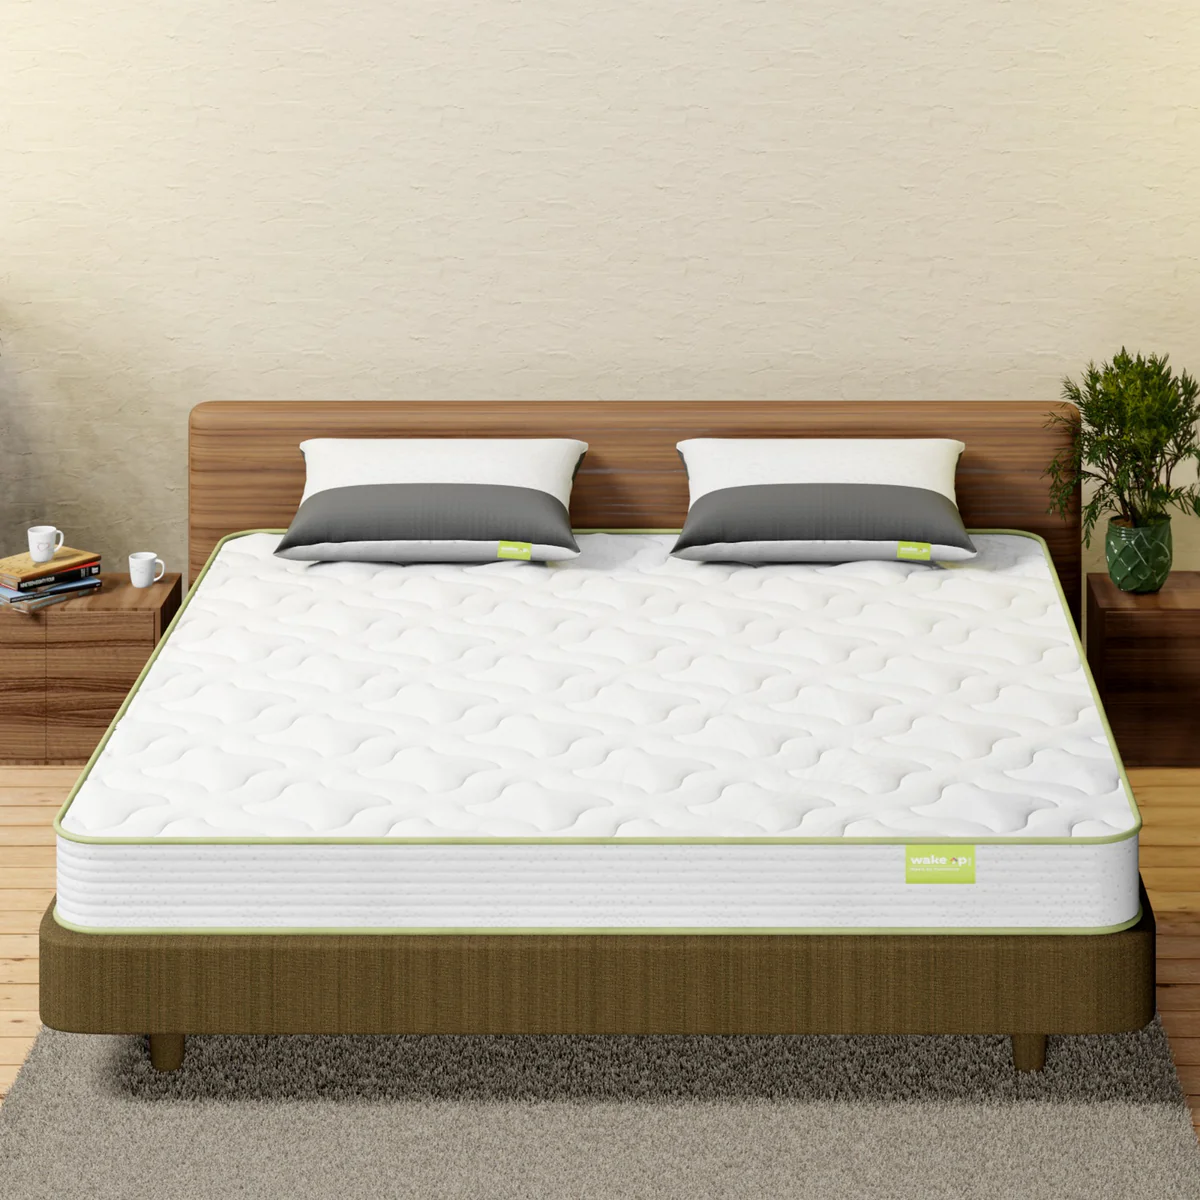 How to Find the Most Comfortable Mattress for Back Pain?